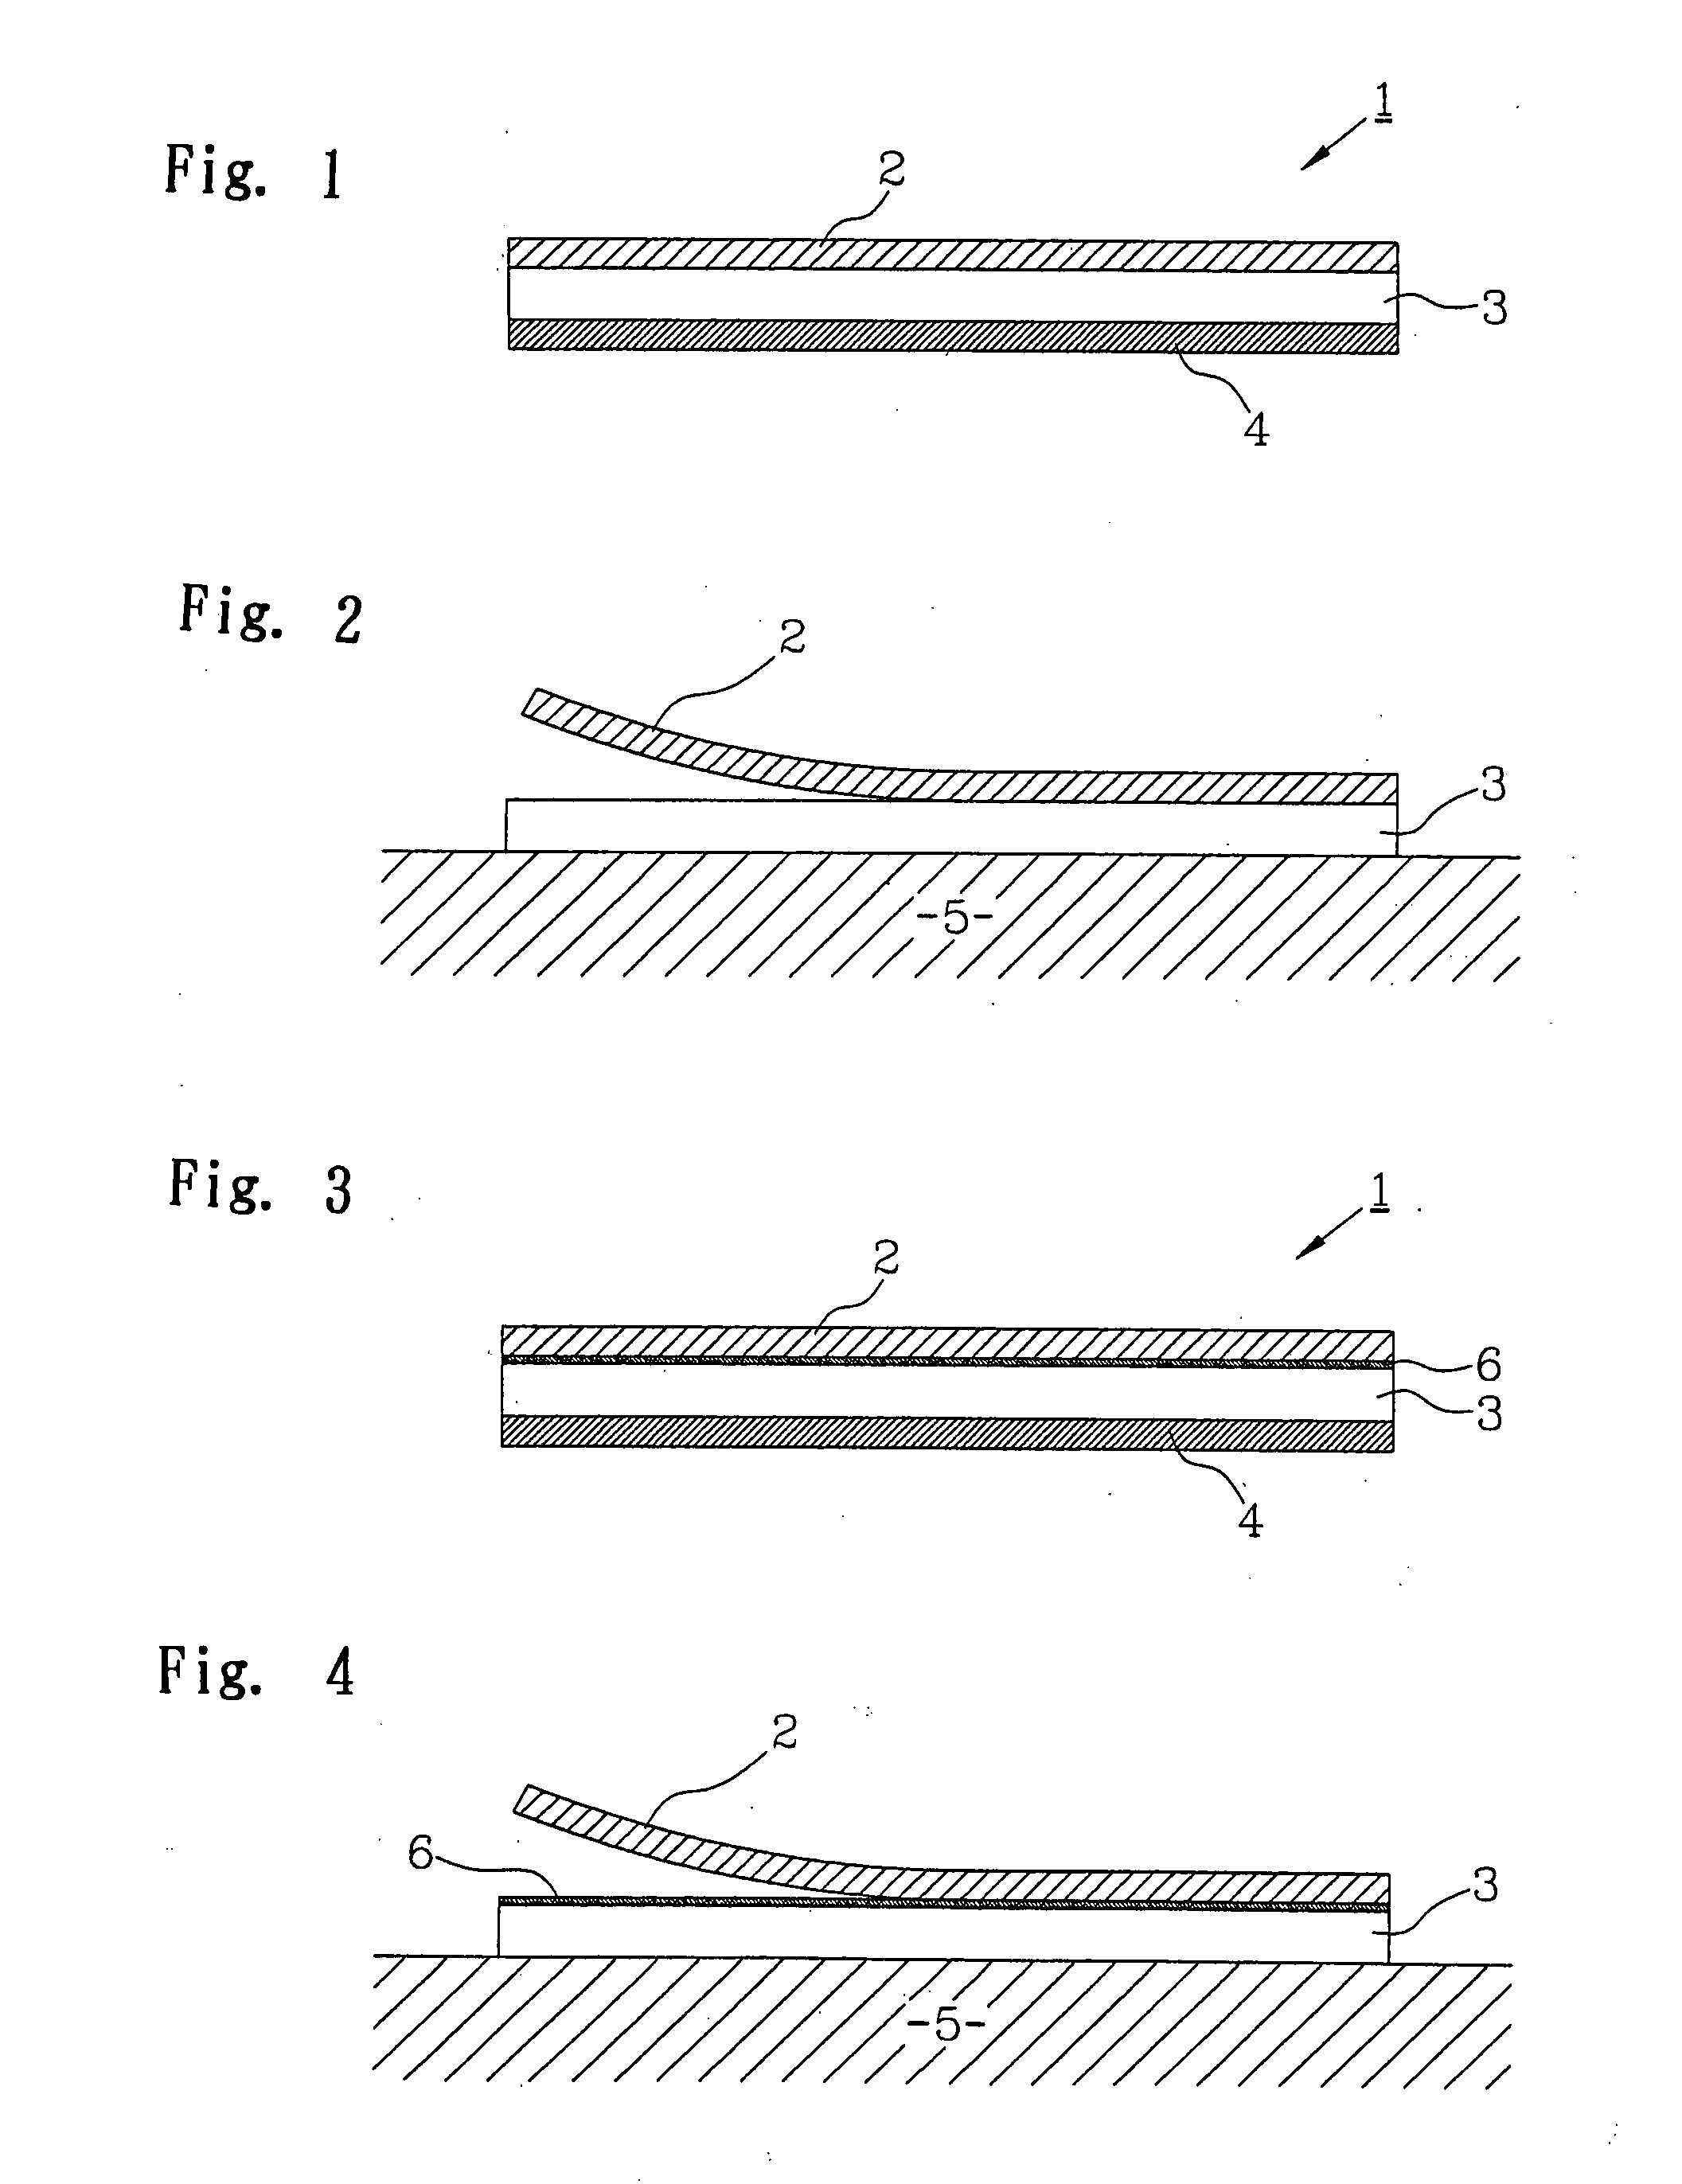 Skin application medicament, method of applying the same to skin, and method of manufacturing the same